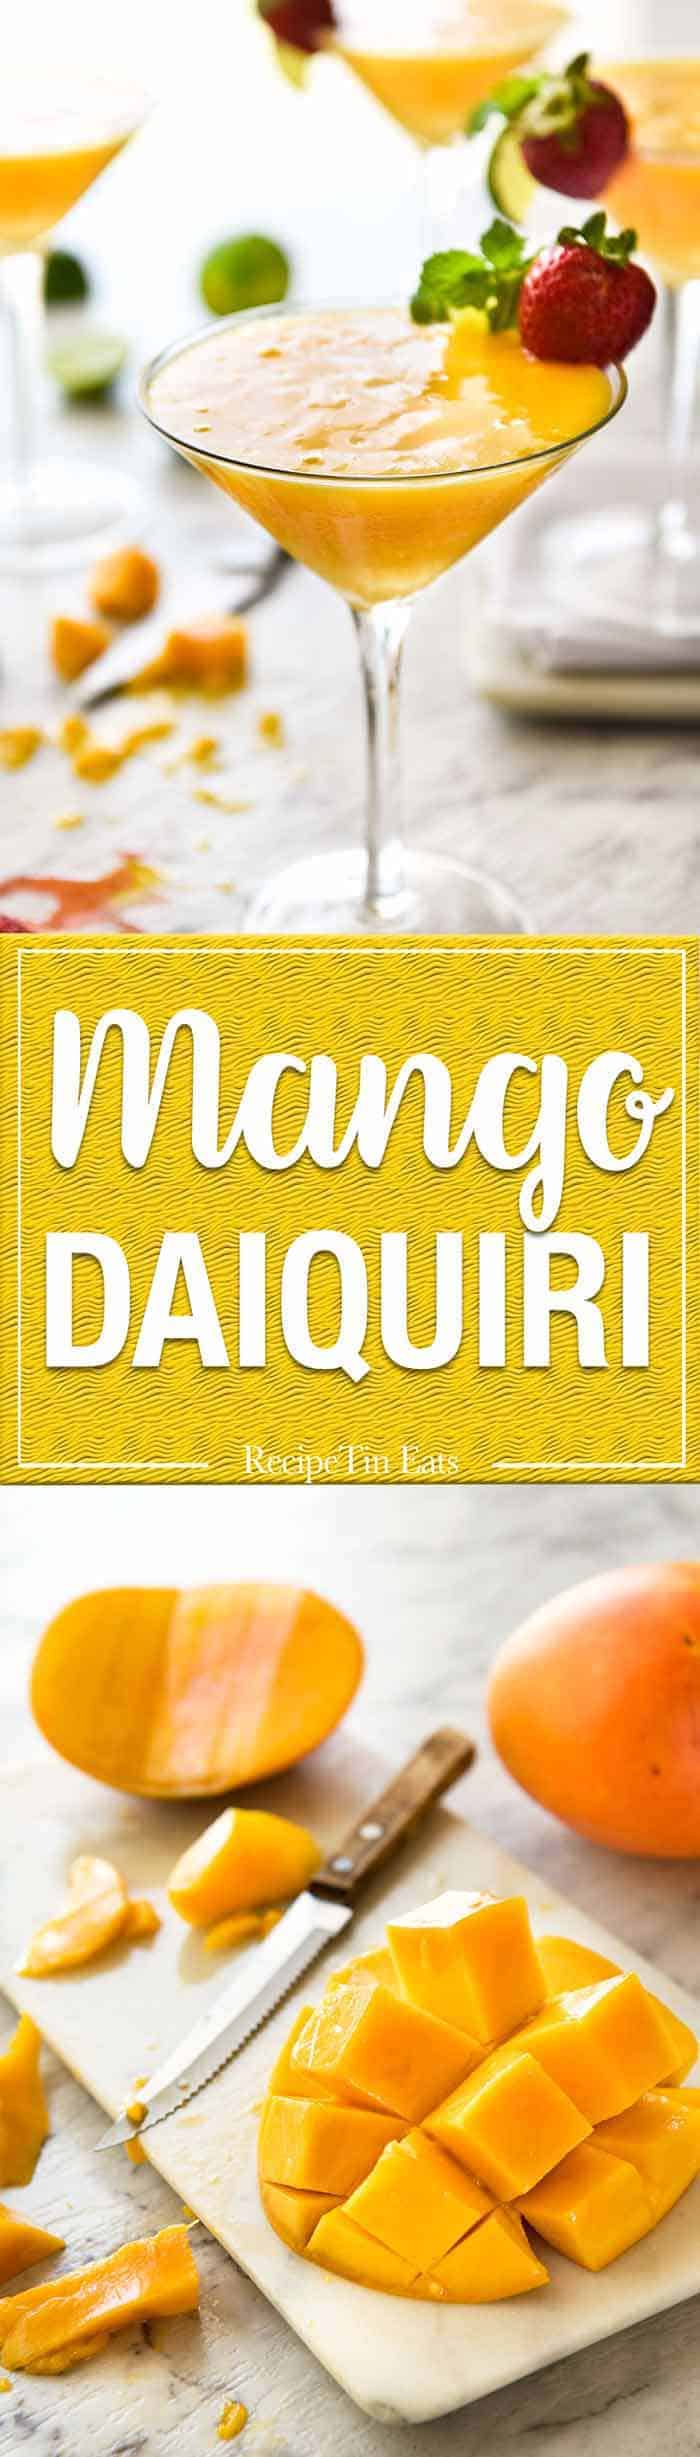 Mango Daiquiri made with fresh juicy mangoes, the king of all cocktails! Make this with or without a blender, frozen or not frozen. www.recipetineats.com